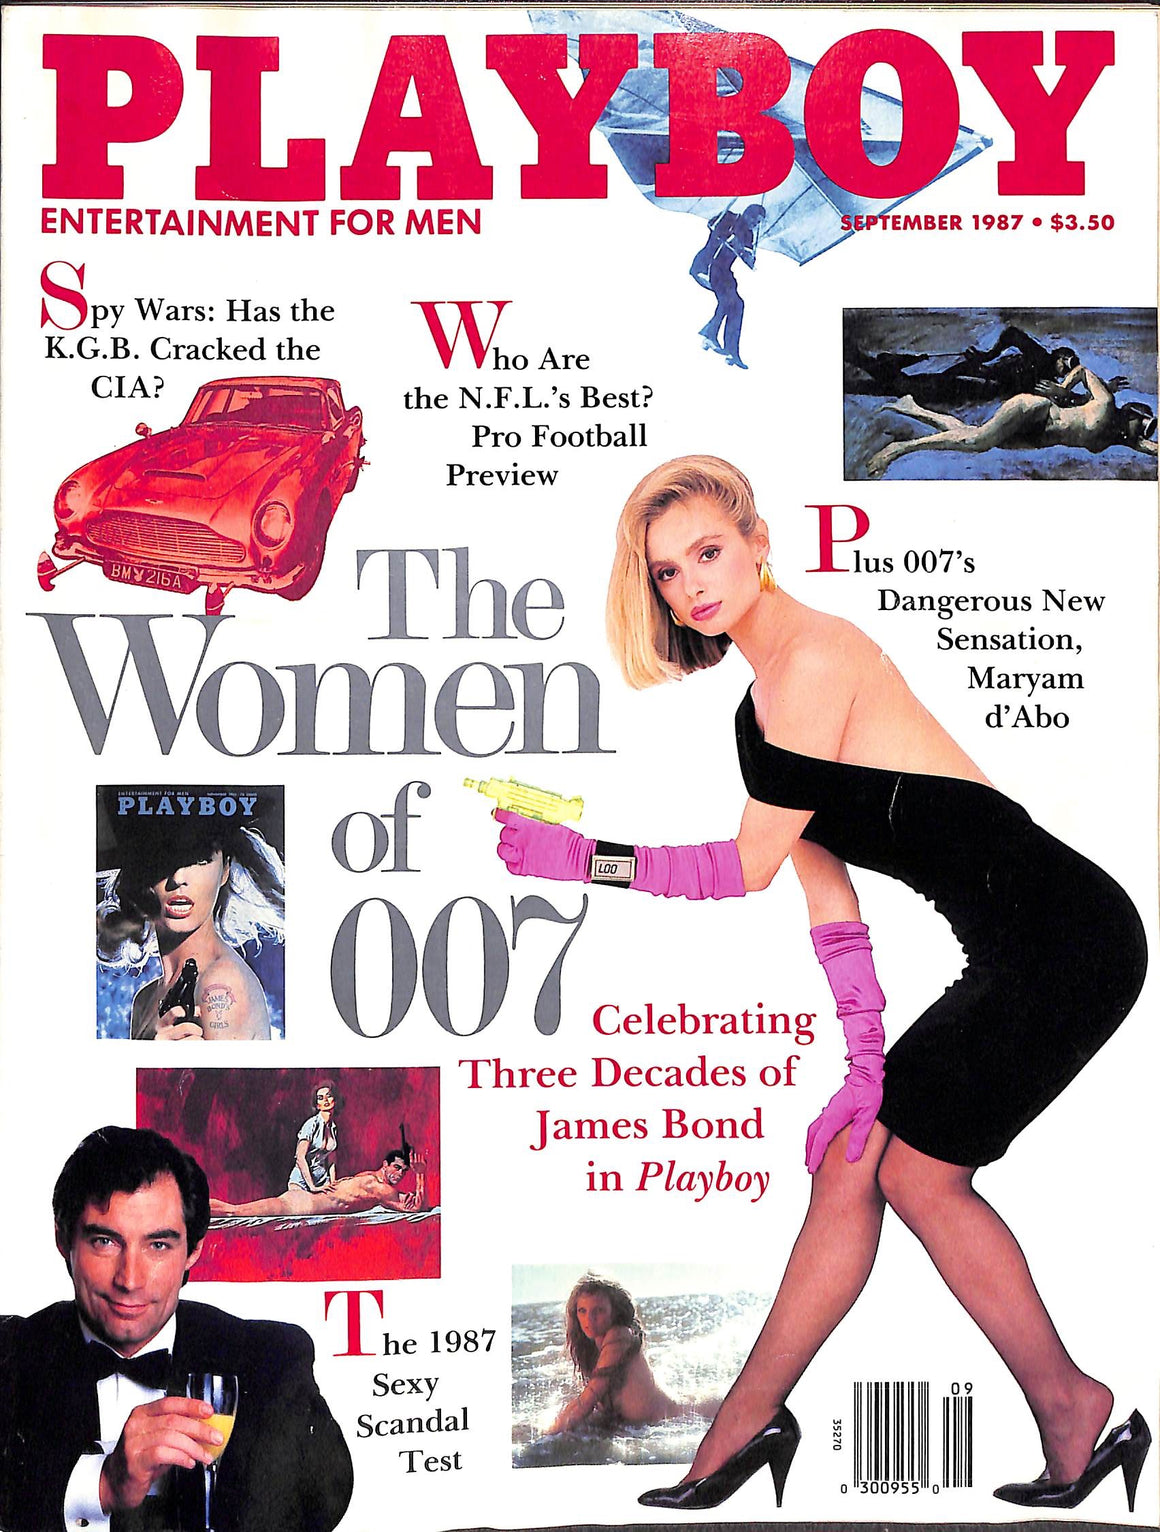 Playboy: The Women Of 007" September 1987 (SOLD)